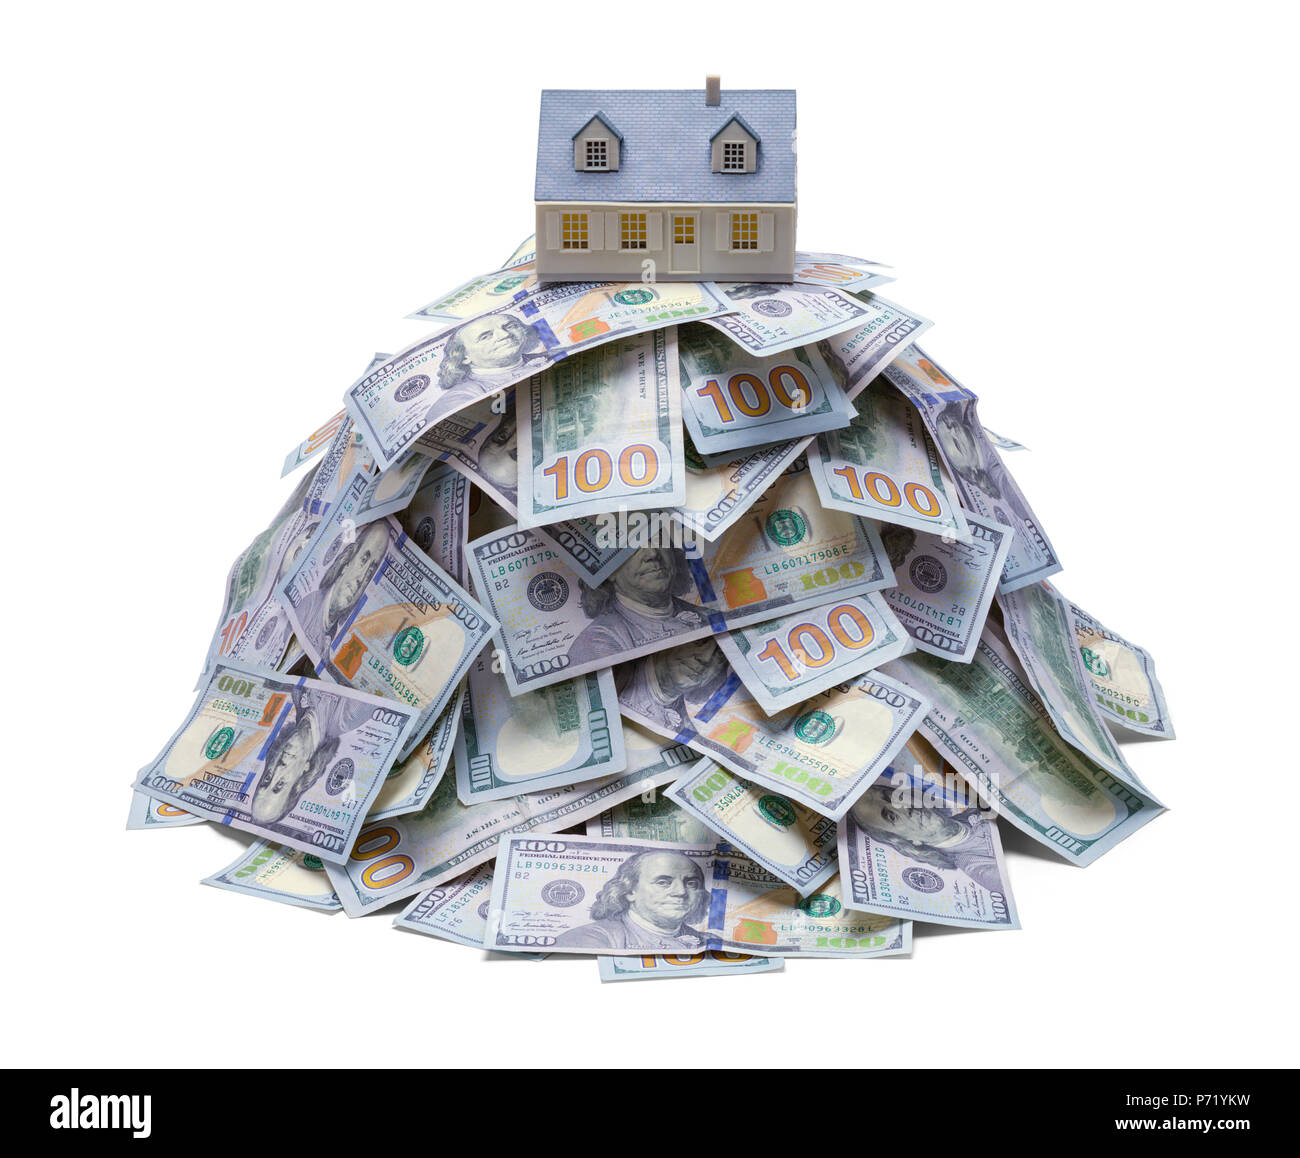 Pile of Hundred Dollar Bills with House on Top Isolated on White. Stock Photo